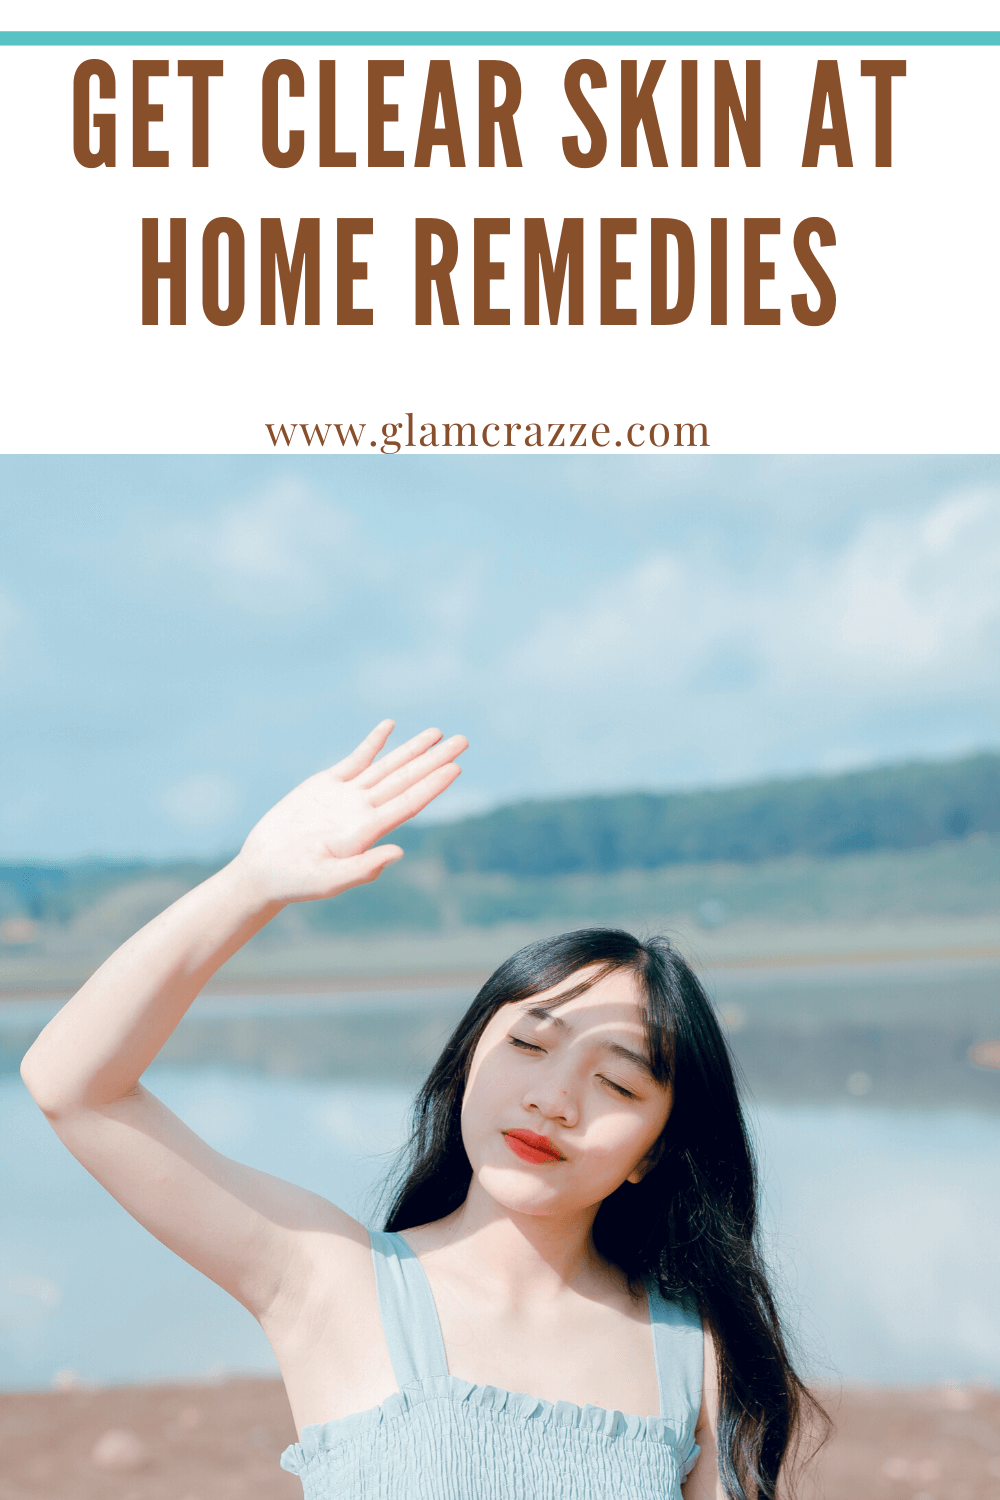 Get clear skin at home remedies